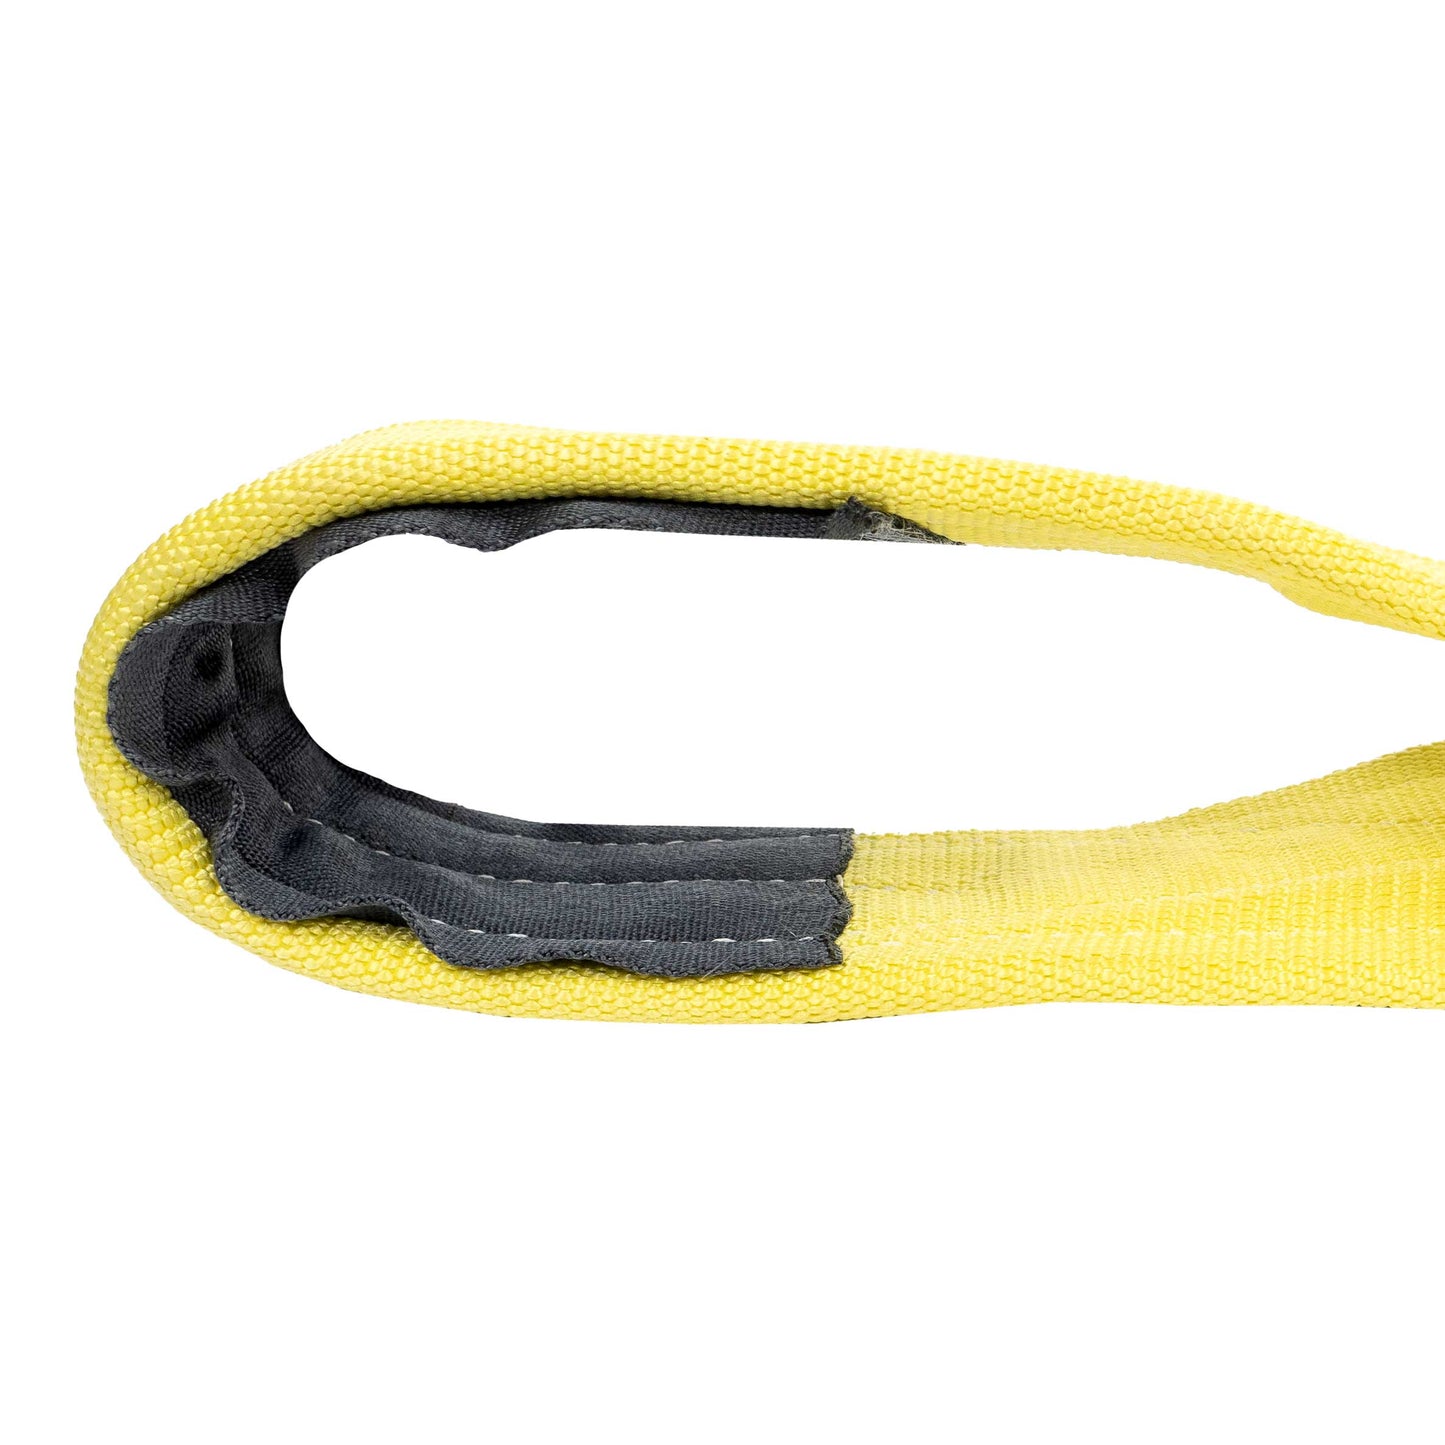 10" x 20' Heavy Duty Recovery Strap with Reinforced Cordura Eyes | 40,000 WLL